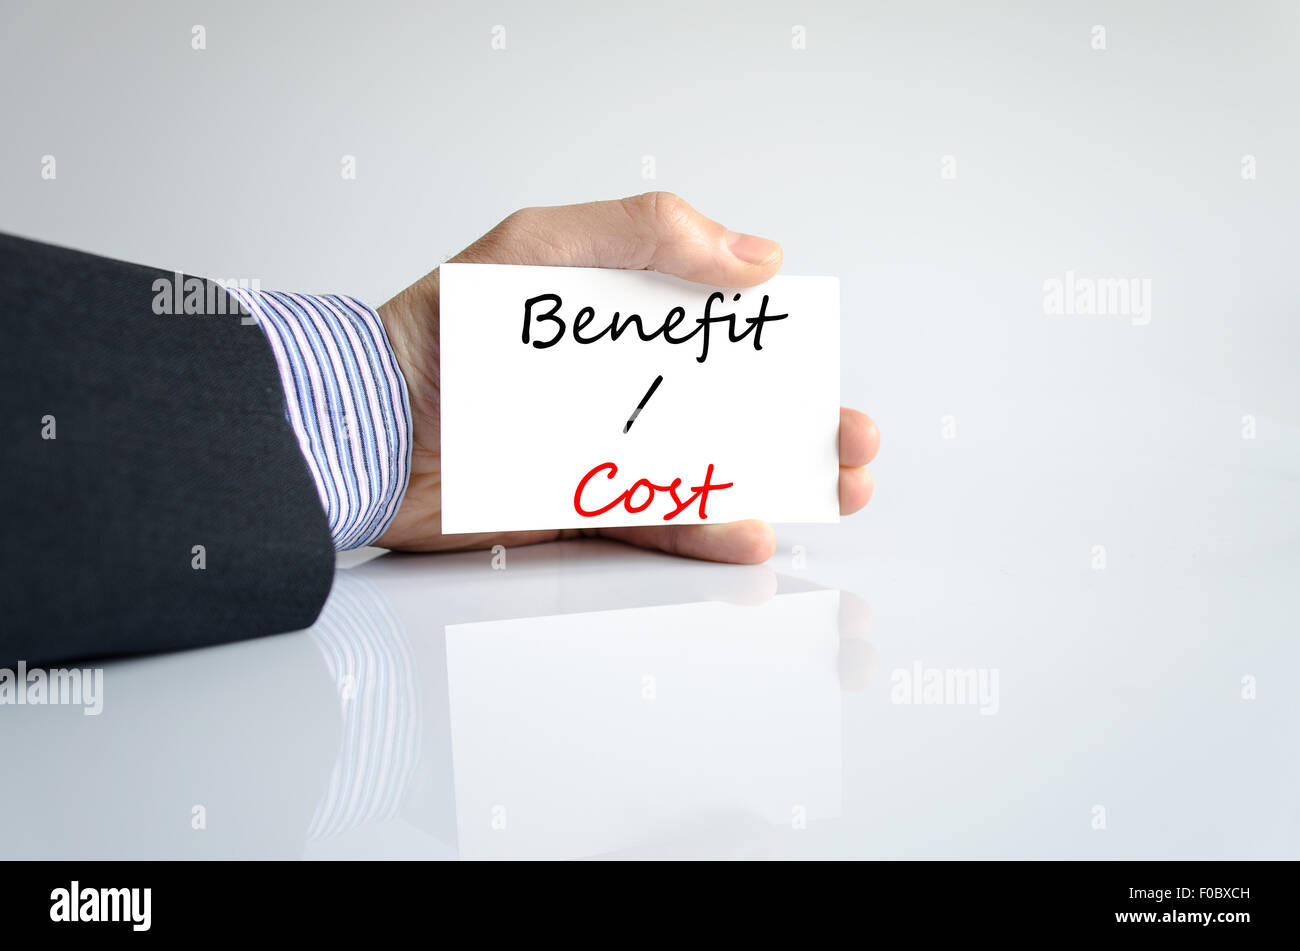 Benefits cost text concept isolated over white background Stock Photo